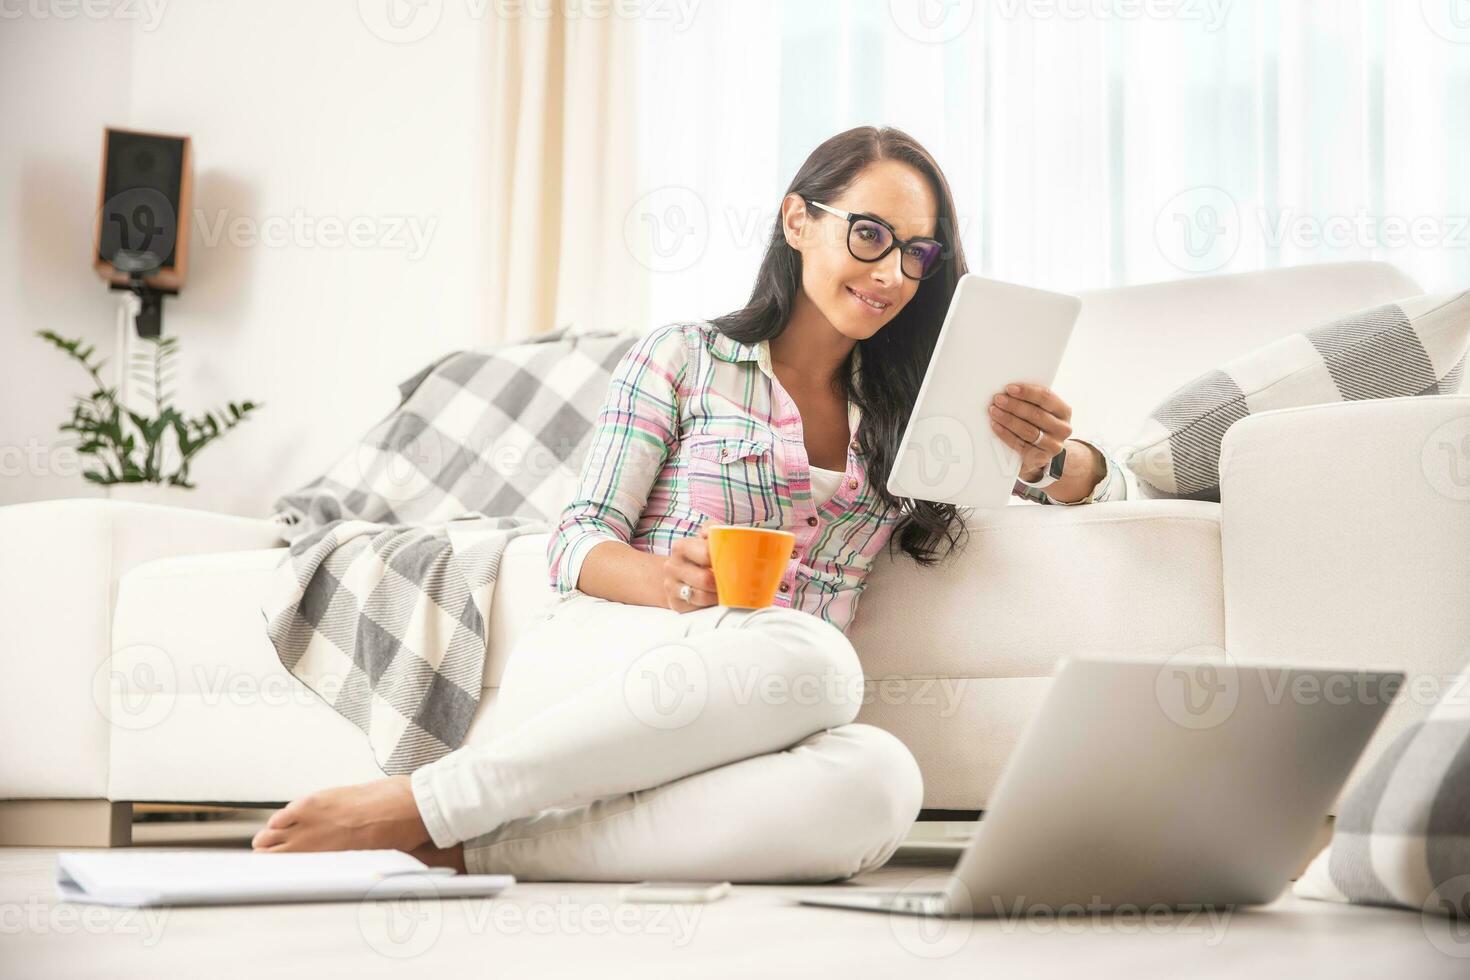 Good looking girl in glasses reading a tablet and drinking coffee leaned against a couch and sitting on a floor photo